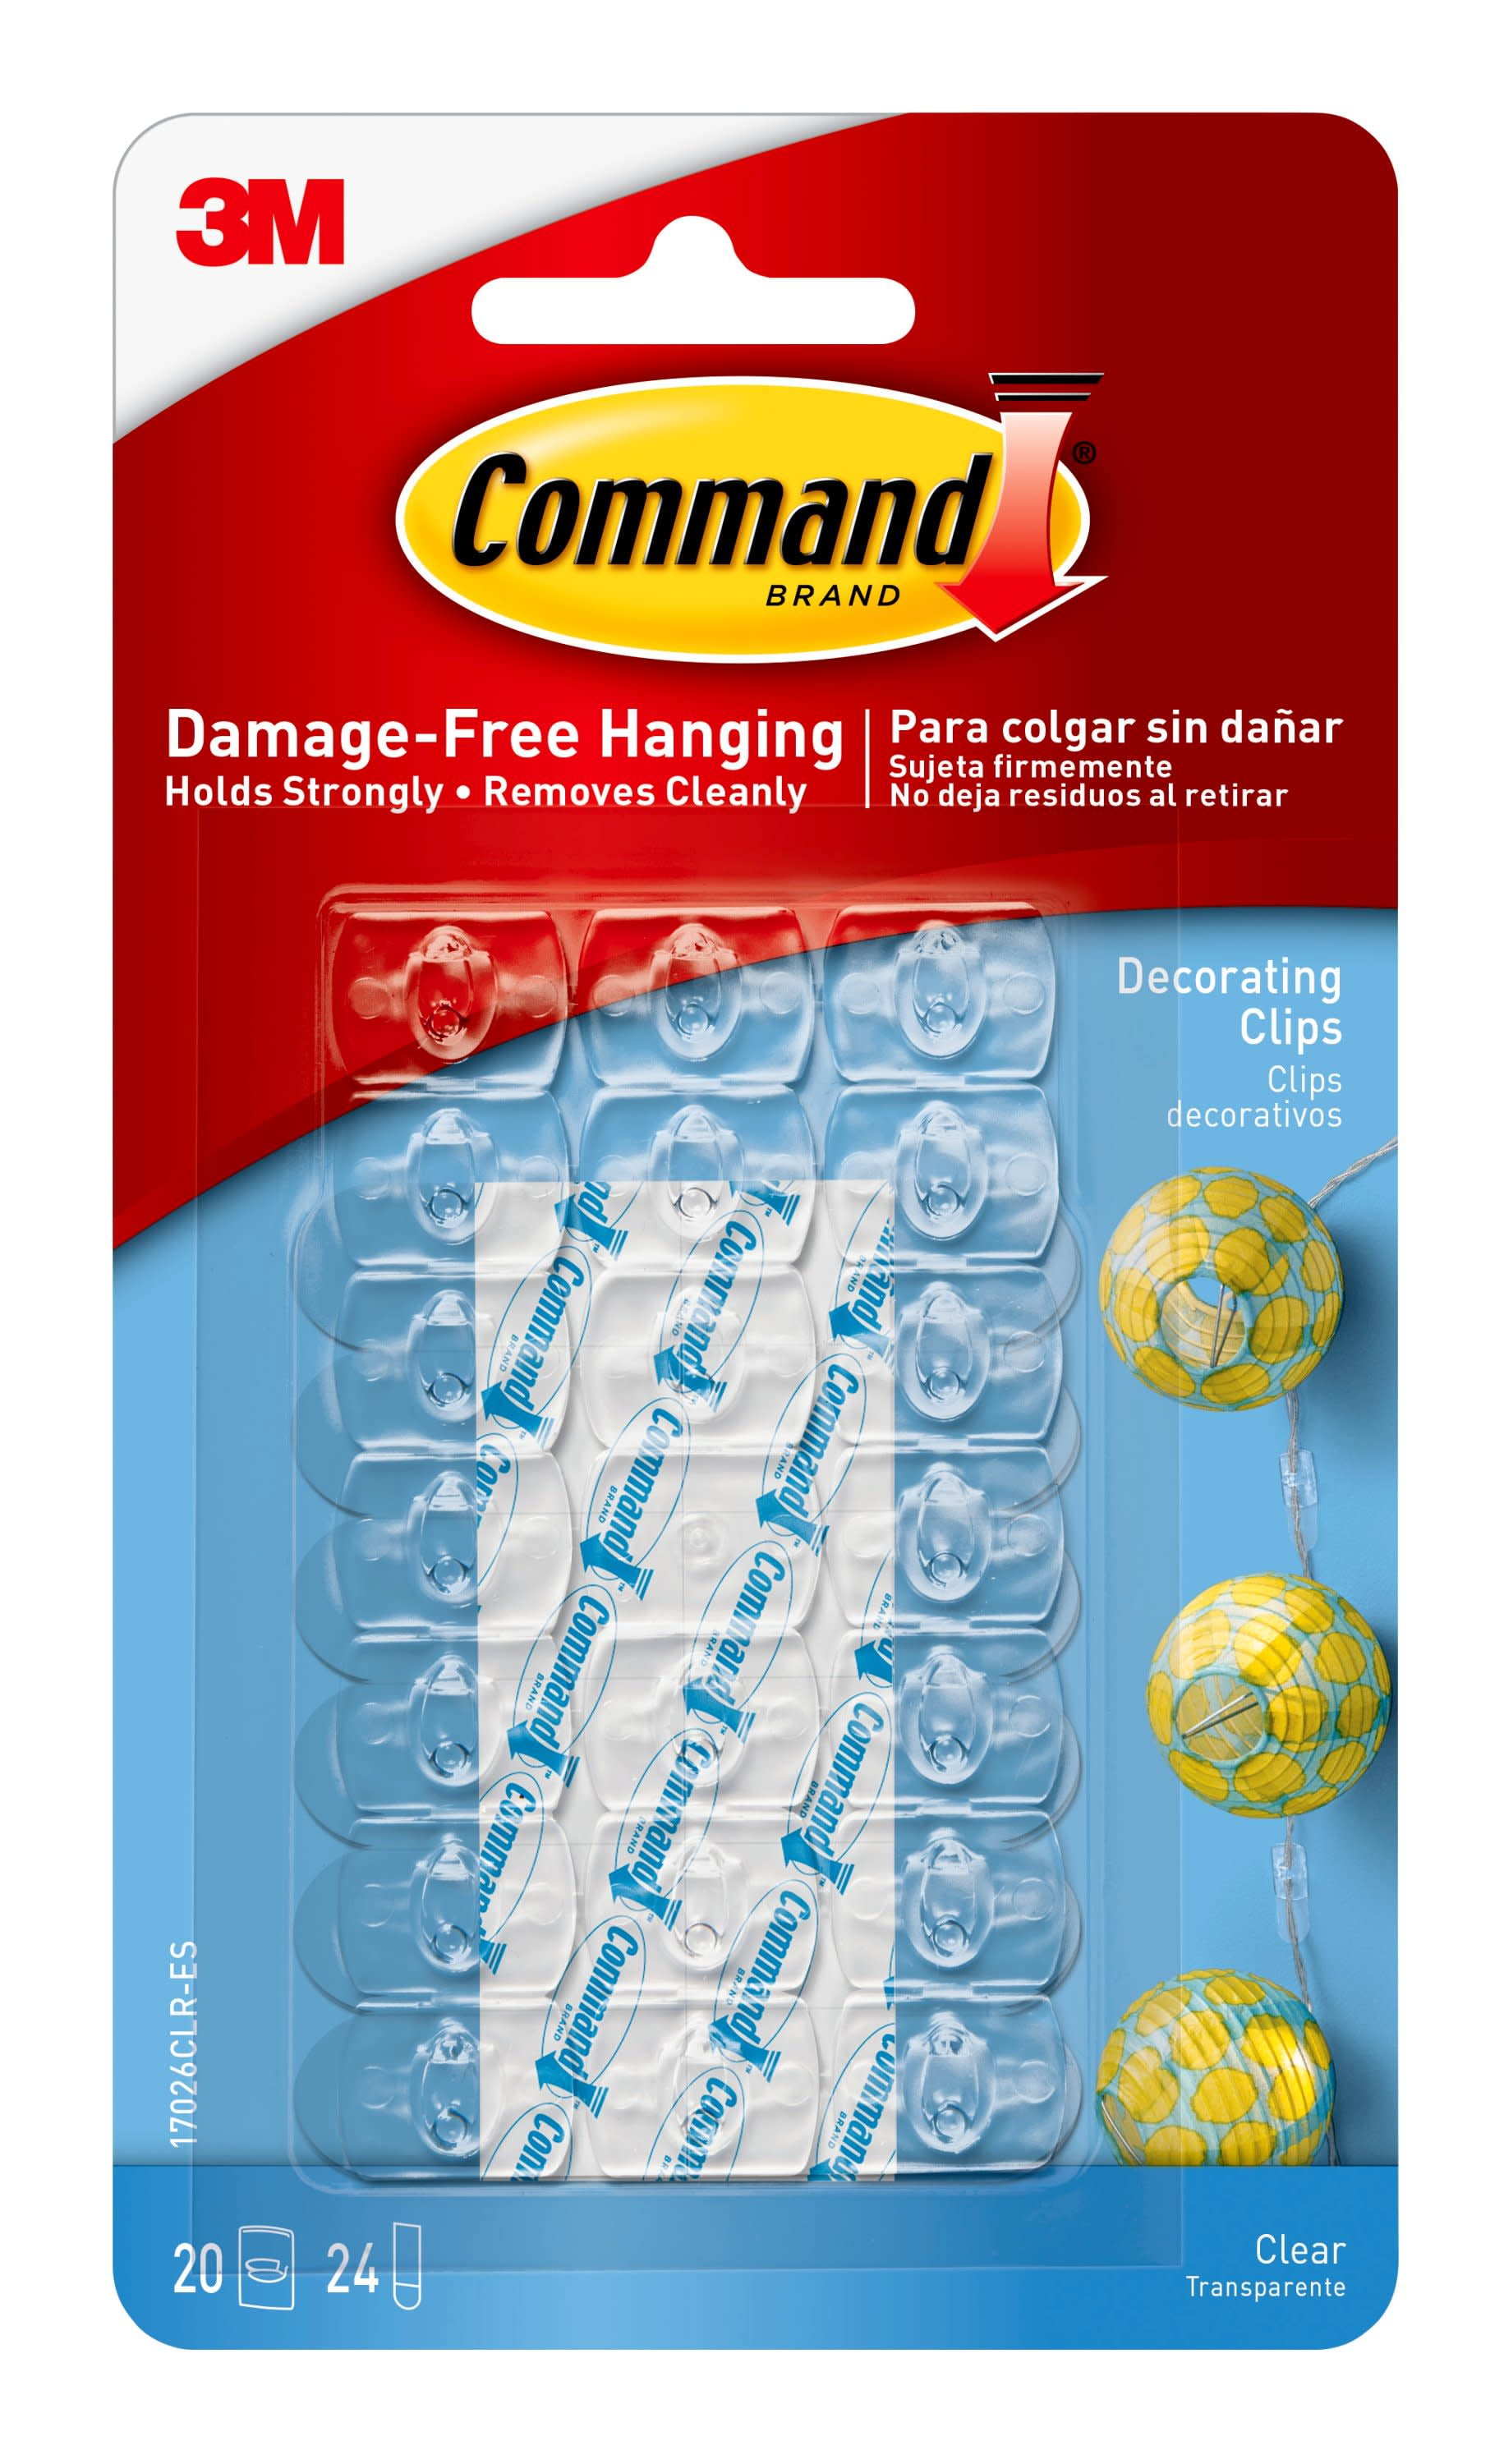 3M Command Clear Decorating Clips Value Pk 40 Clips 48 Strips FAST FREE SHIPPING 